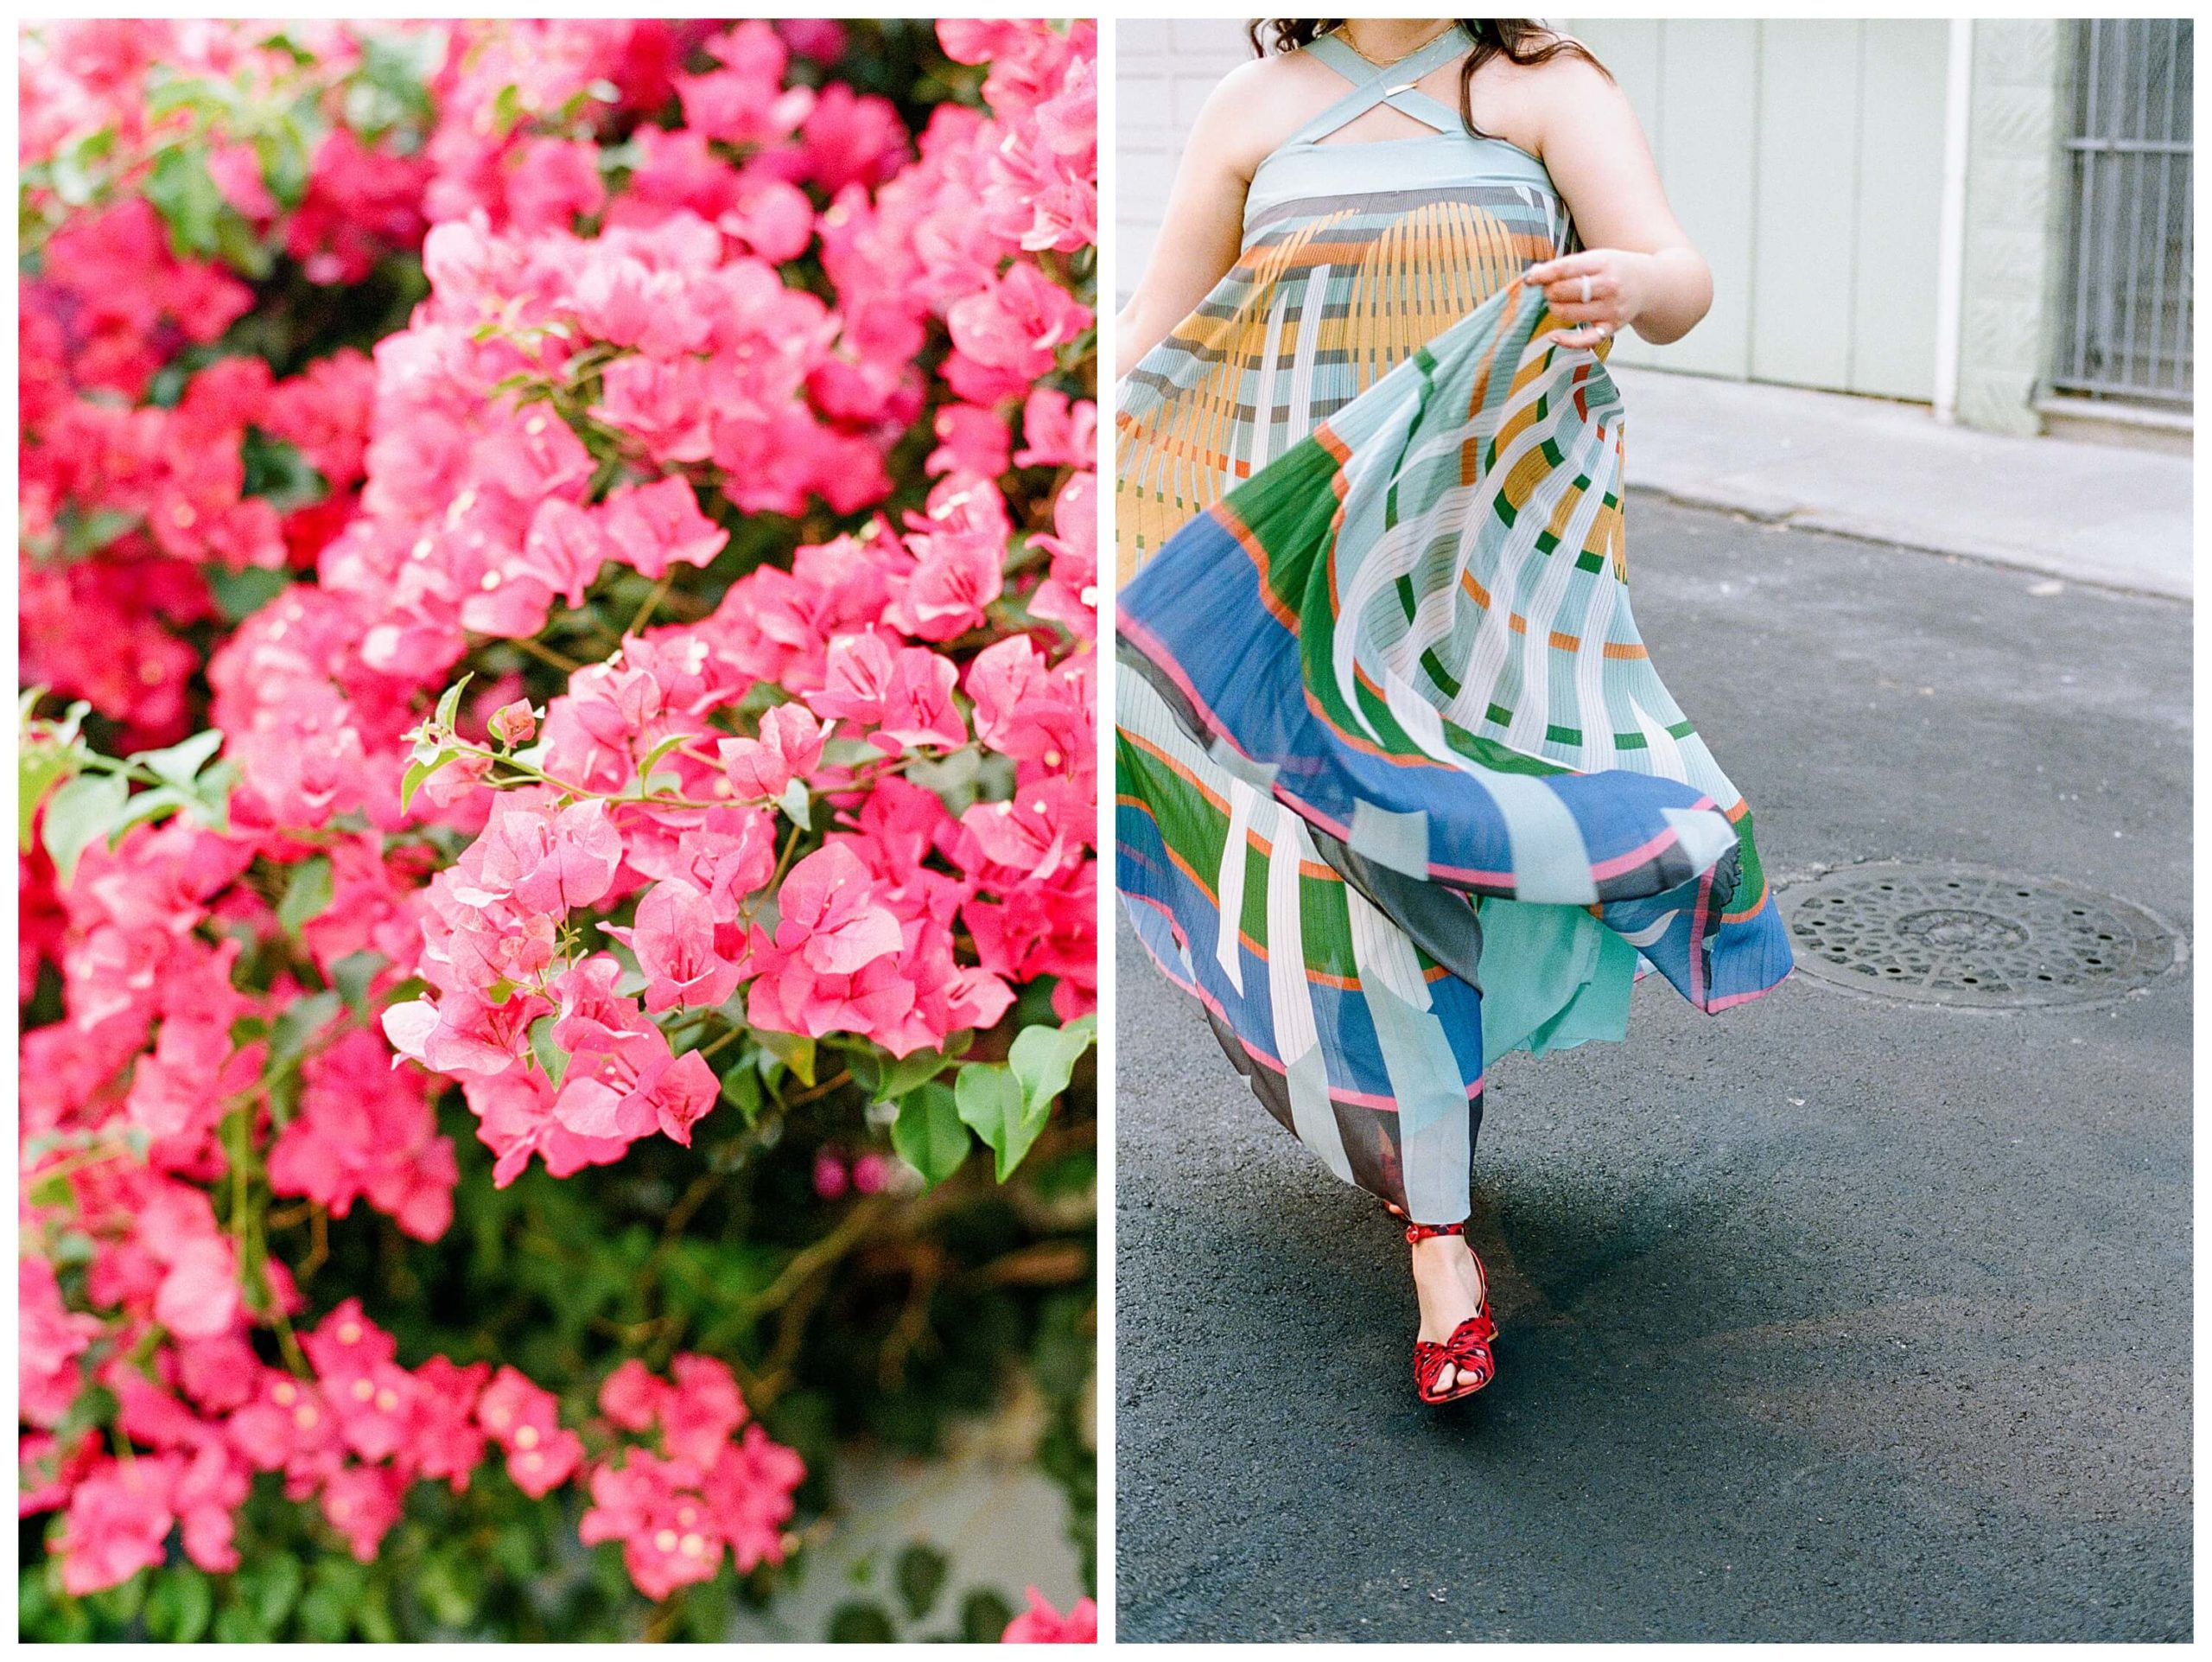 Left: A cascade of bougainvillea is caught in a ray of sunlight. Right: A girl wearing a multi-colored flowing dress sashays across the street, swishing her skirt.